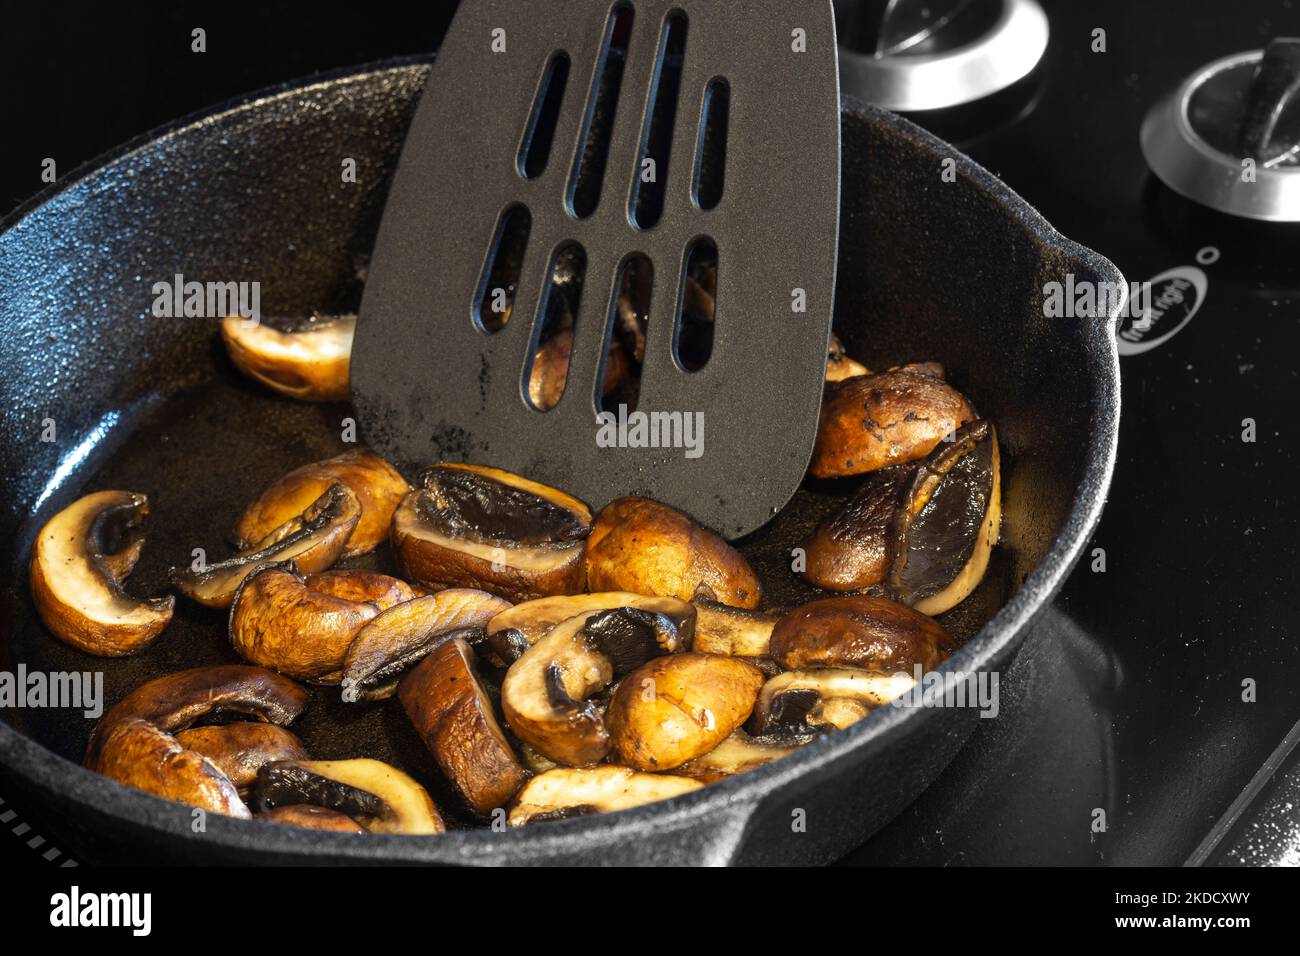 Frying chestnut mushrooms in a cast iron frying pan, on an electric hob stove Stock Photo